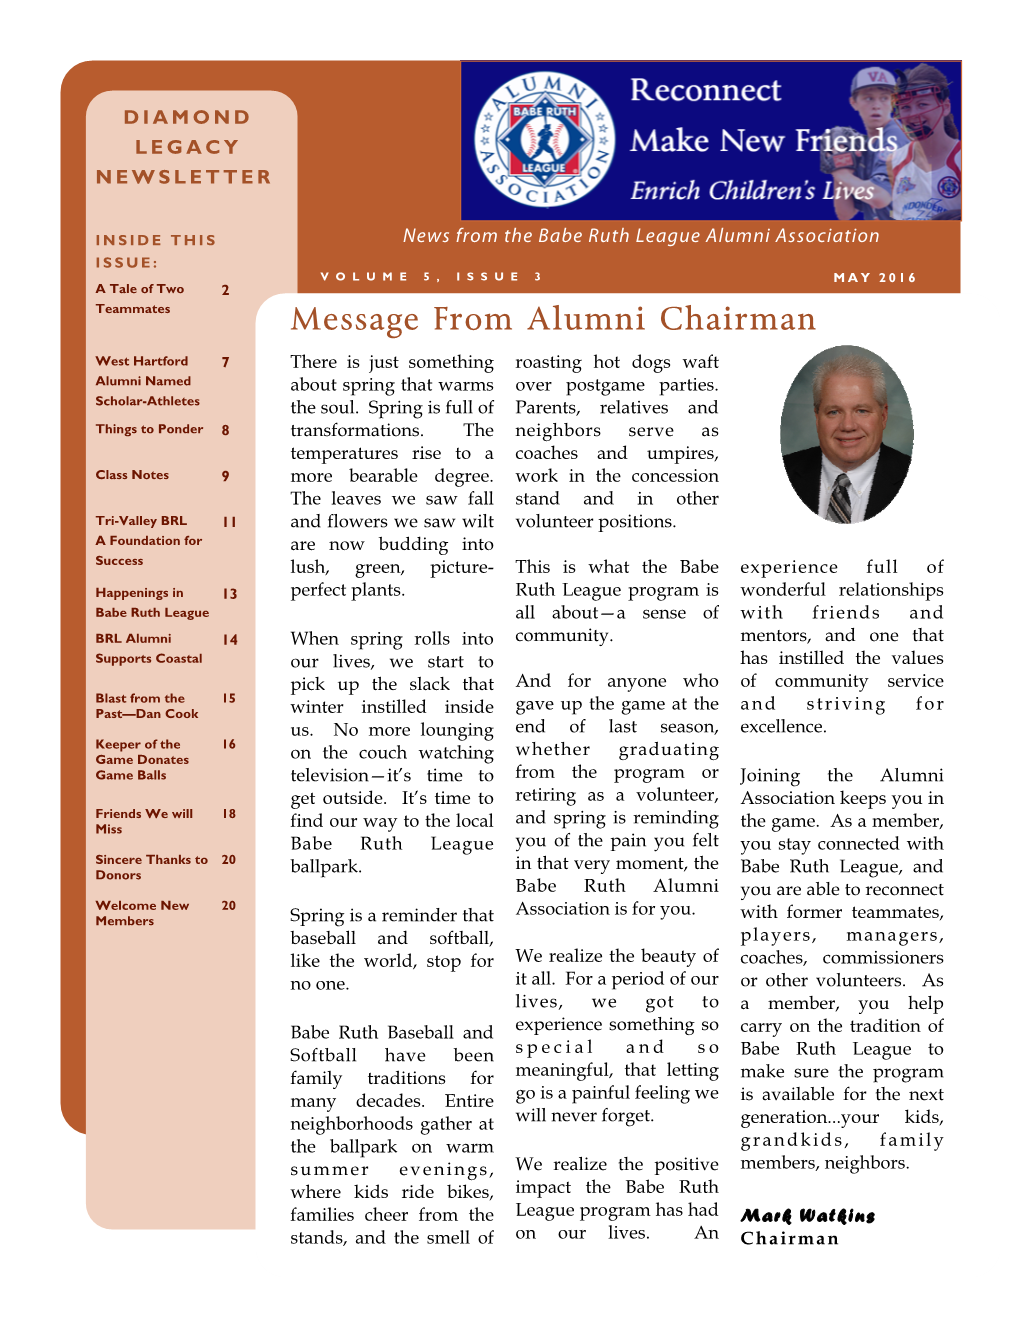 Message from Alumni Chairman